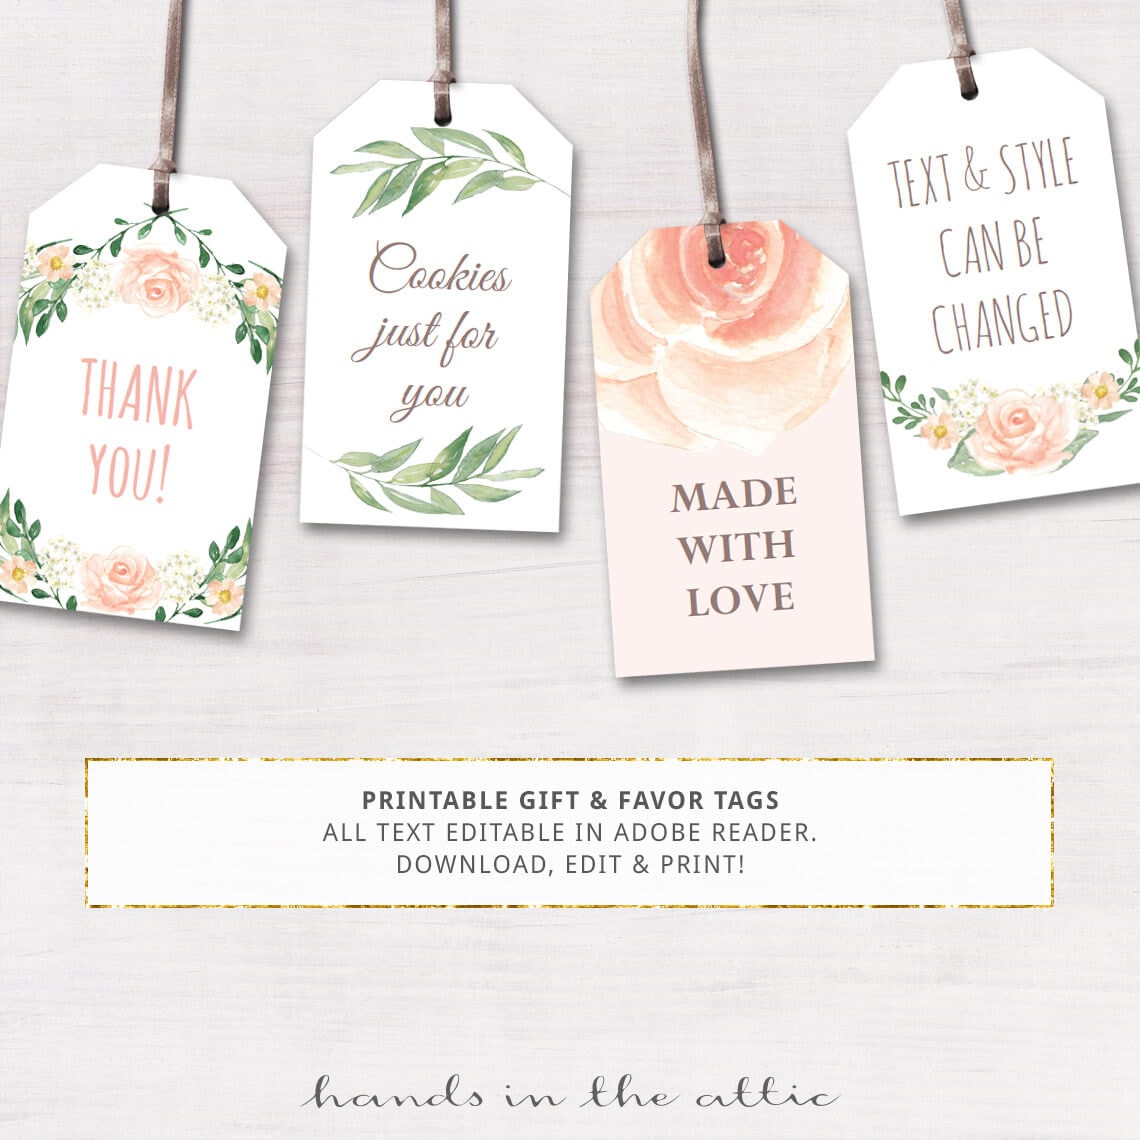 Printable baby shower labels editable gift tags by HandsInTheAttic